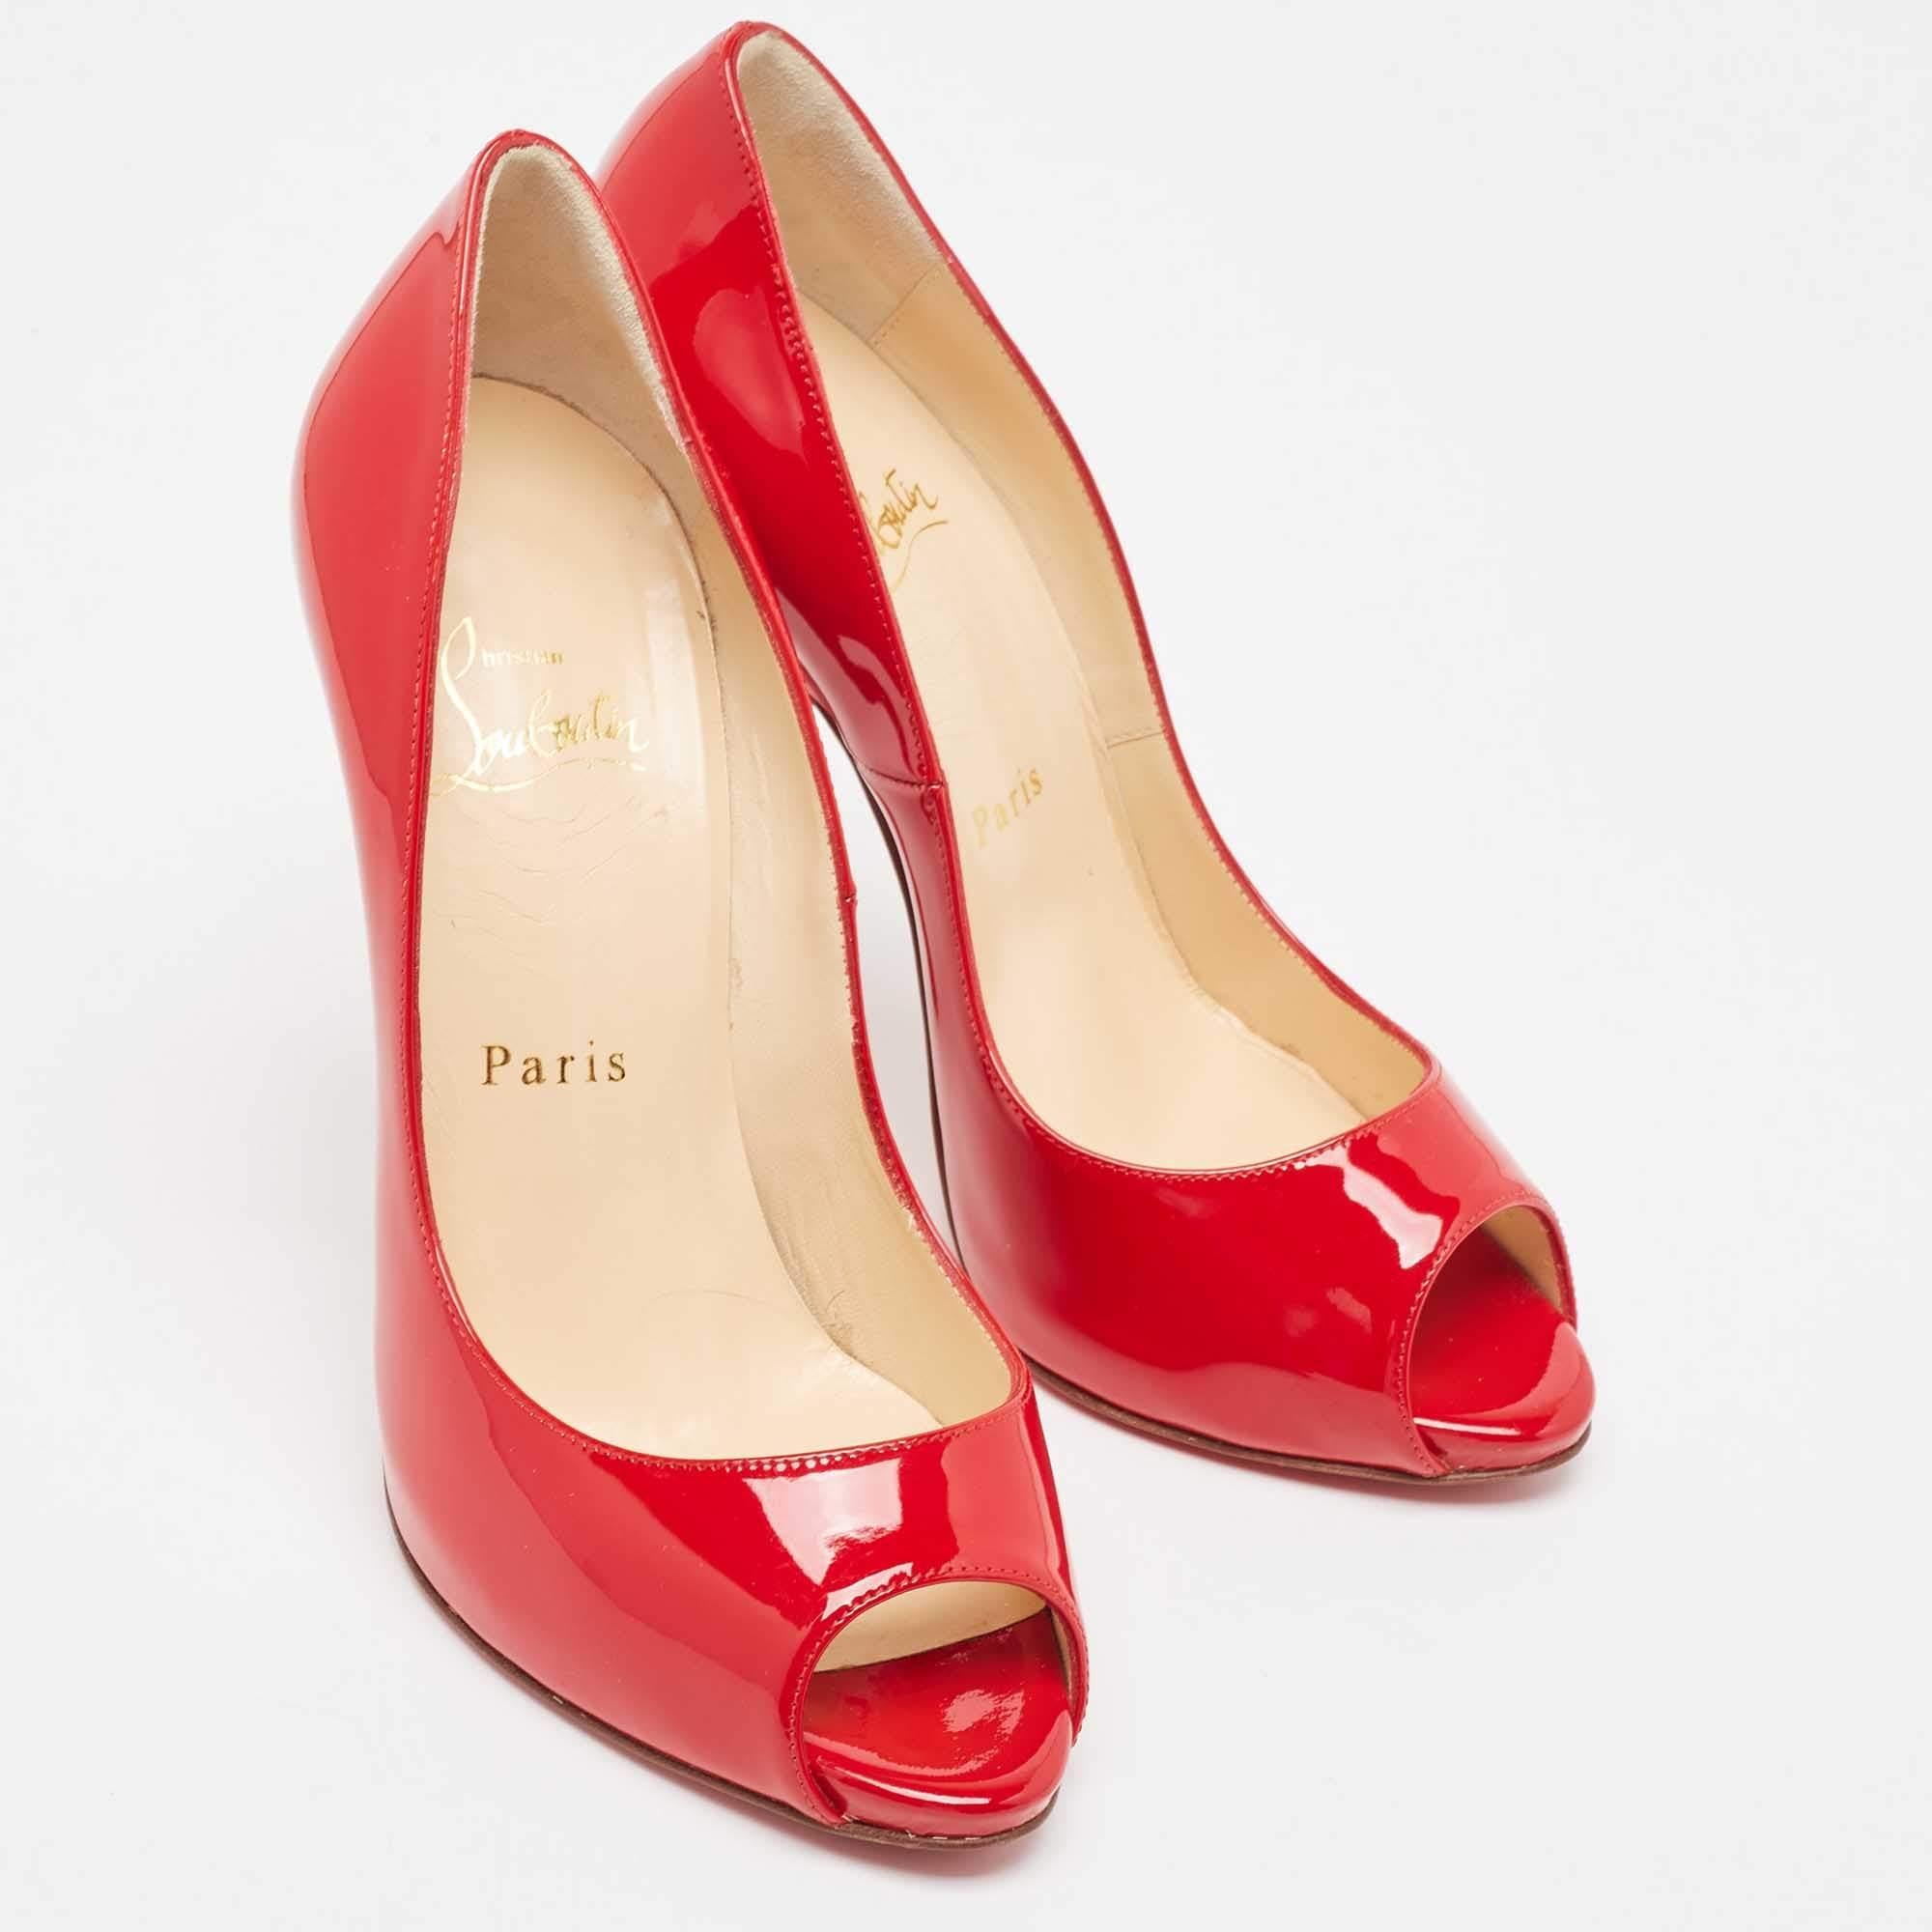 Christian Louboutin Red Patent Leather Maryl Peep Toe Pumps Size 37 In Good Condition For Sale In Dubai, Al Qouz 2